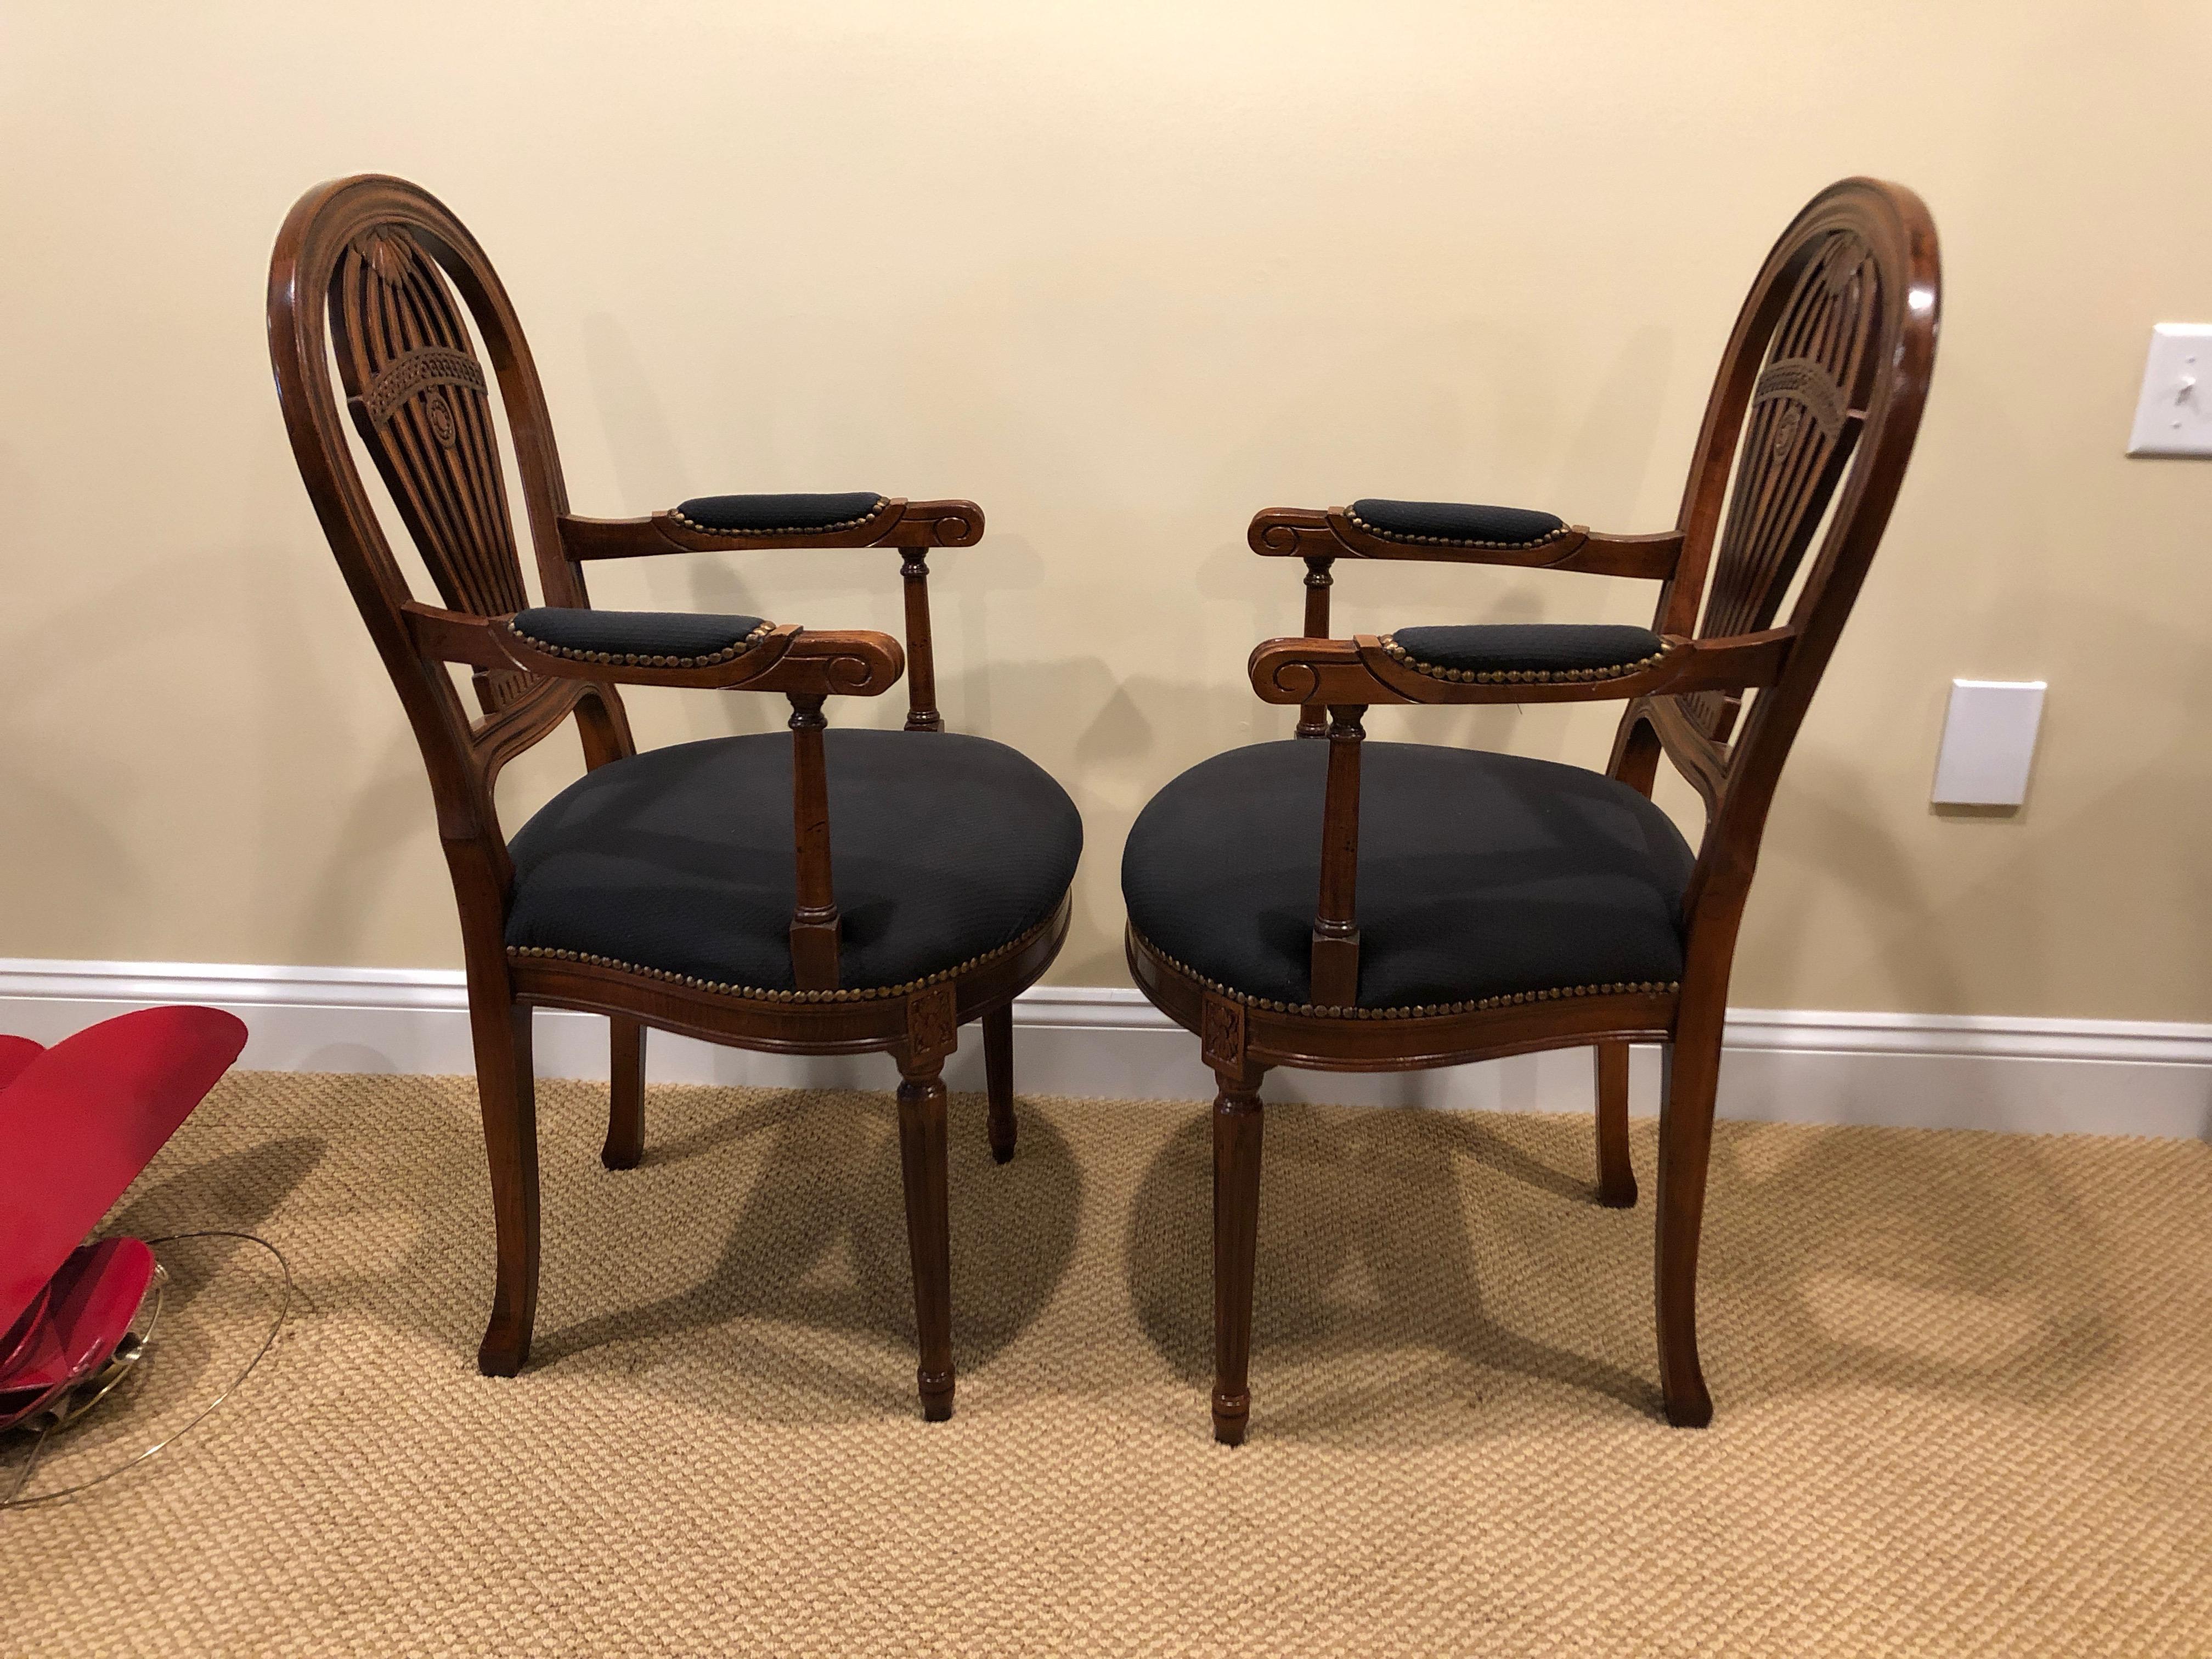 Lovely Italian armchairs having carved fruitwood frames and wonderful backs reminiscent of hot air balloons, with black cotton seats and armrests and handsome brass nailheads.
Measures: Arm height 27.25, seat depth 17.